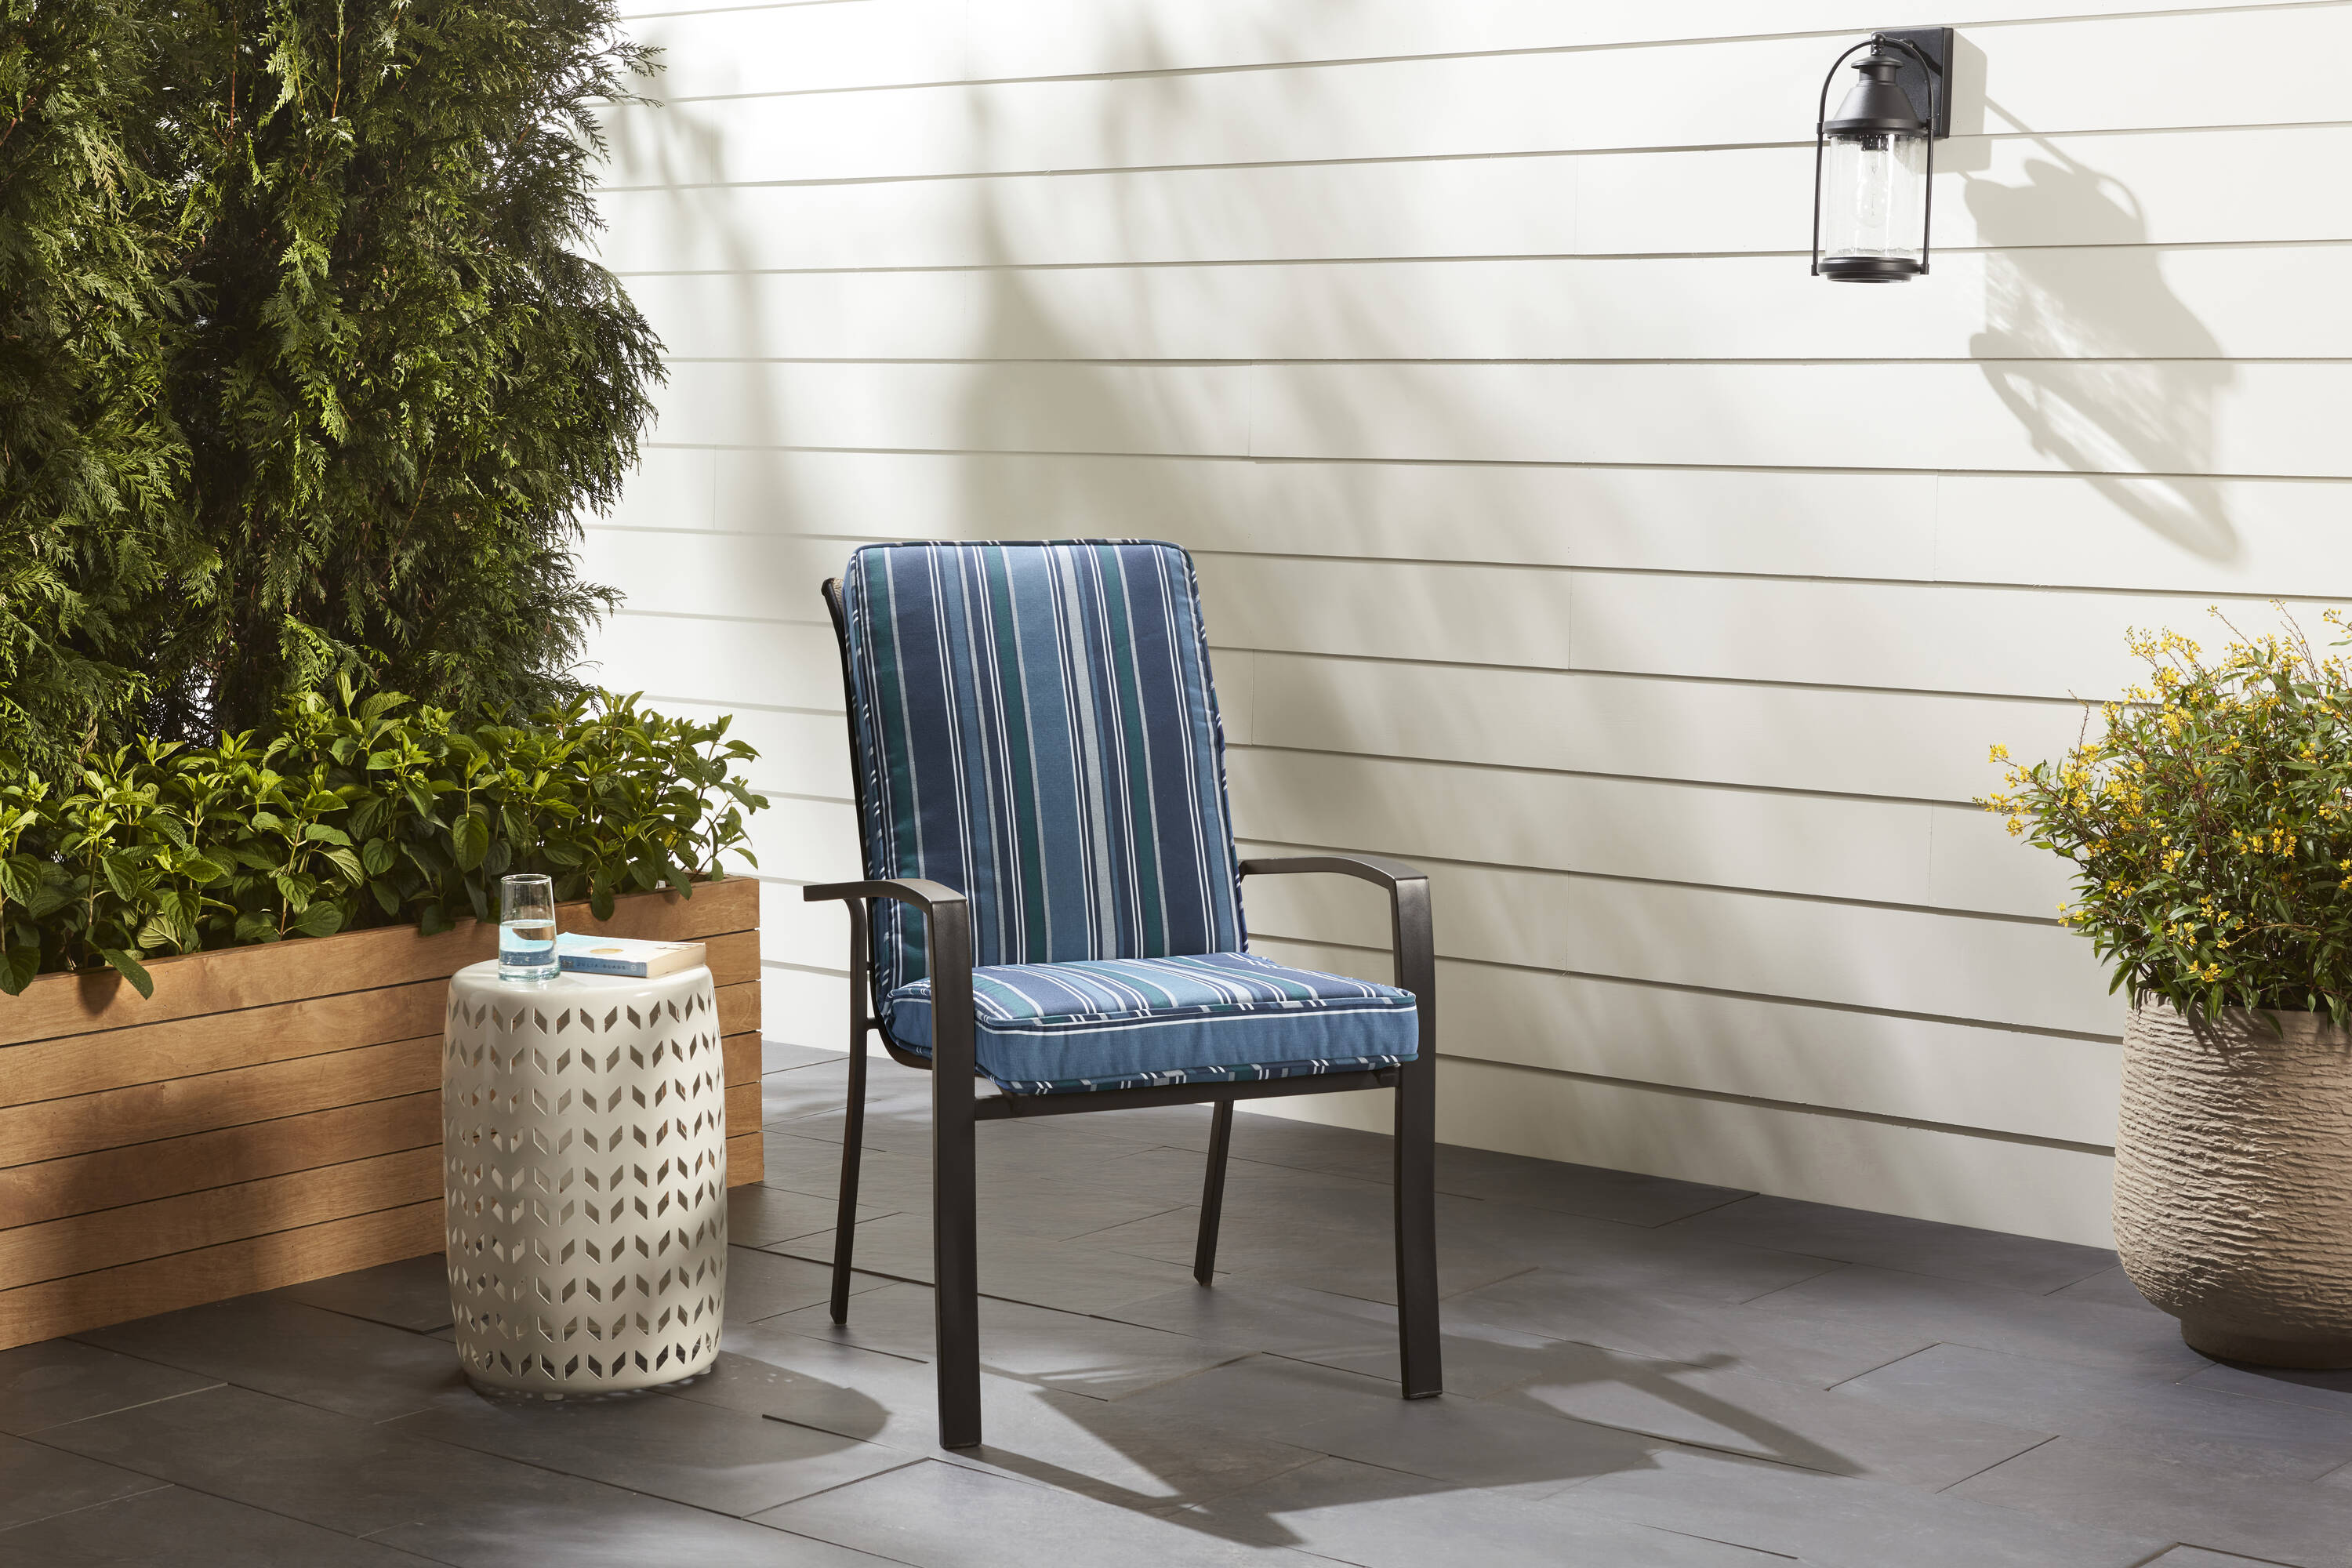 Kensington Garden 21x21 Solid Outdoor Seat And Back Chair Cushion Navy :  Target